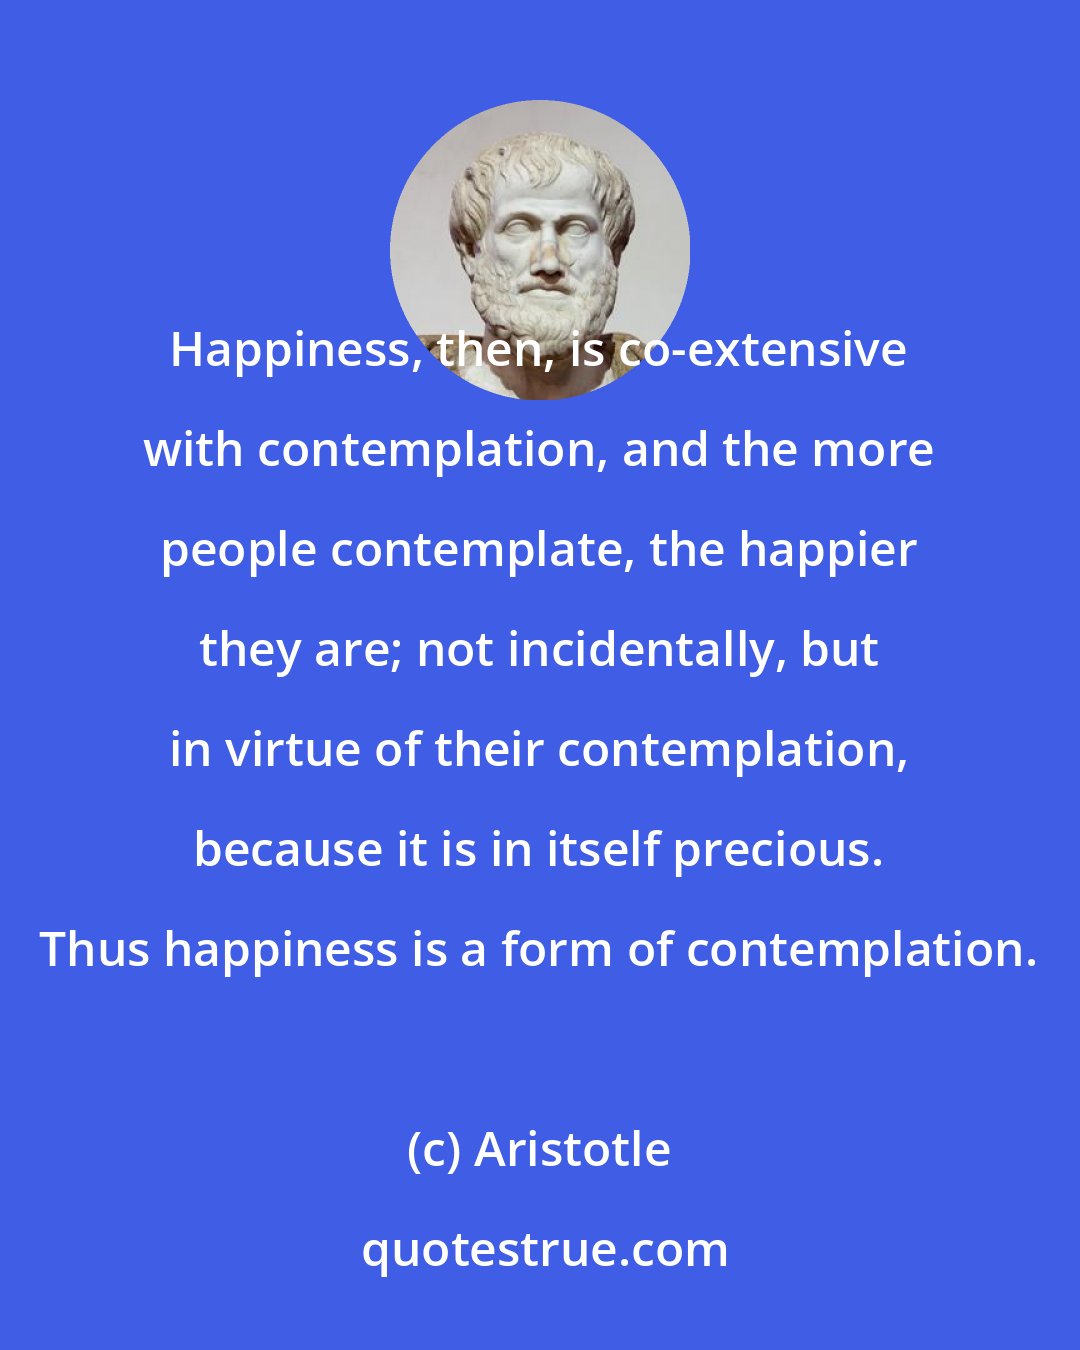 Aristotle: Happiness, then, is co-extensive with contemplation, and the more people contemplate, the happier they are; not incidentally, but in virtue of their contemplation, because it is in itself precious. Thus happiness is a form of contemplation.